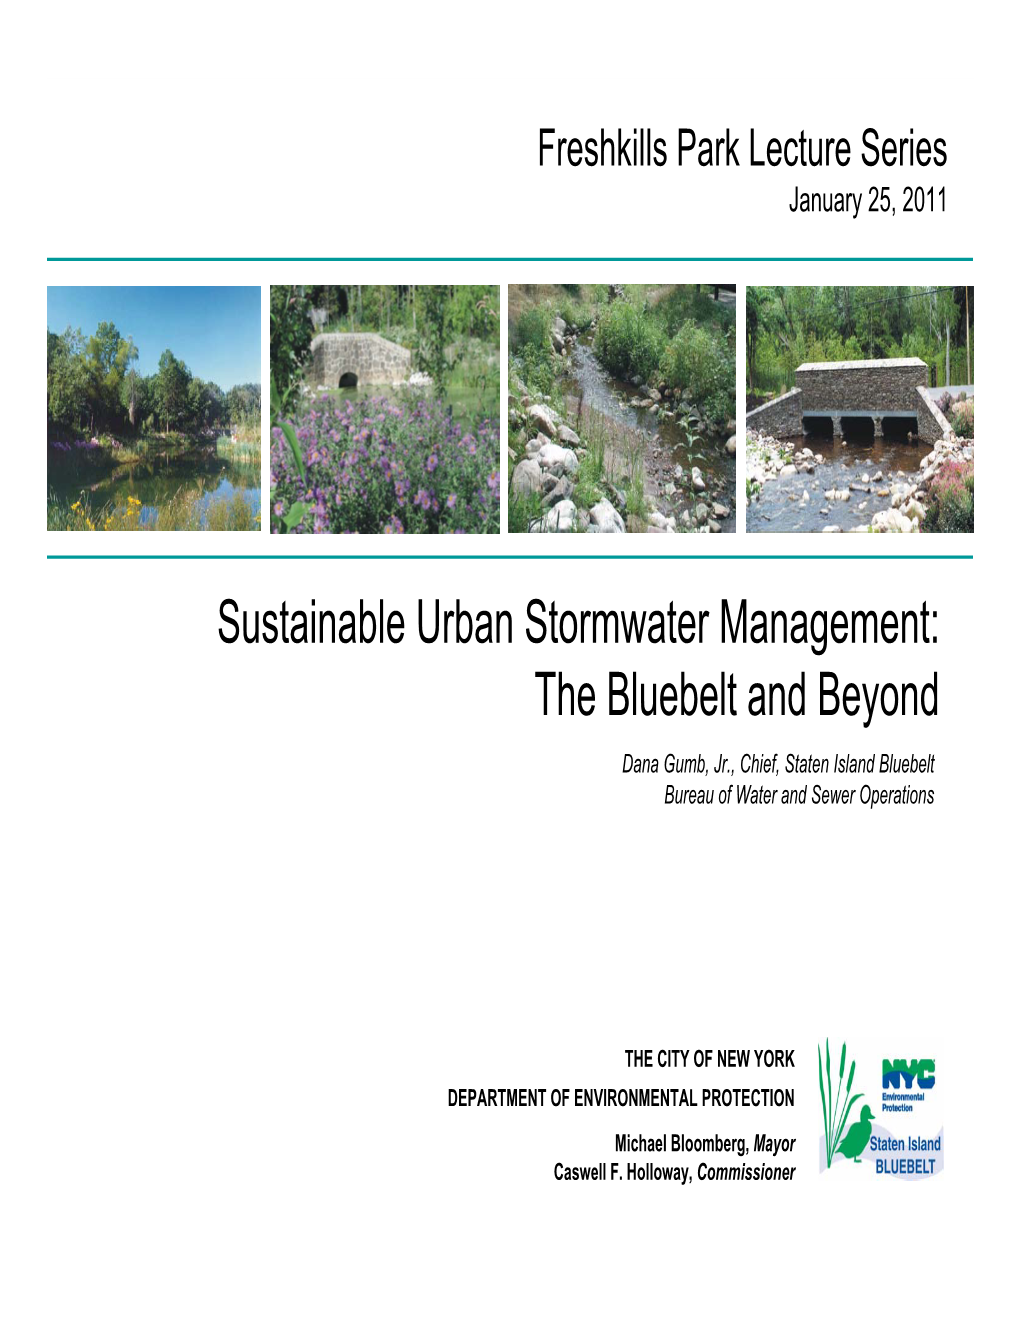 Sustainable Urban Stormwater Management: the Bluebelt and Beyond Dana Gumb, Jr., Chief, Staten Island Bluebelt Bureau of Water and Sewer Operations